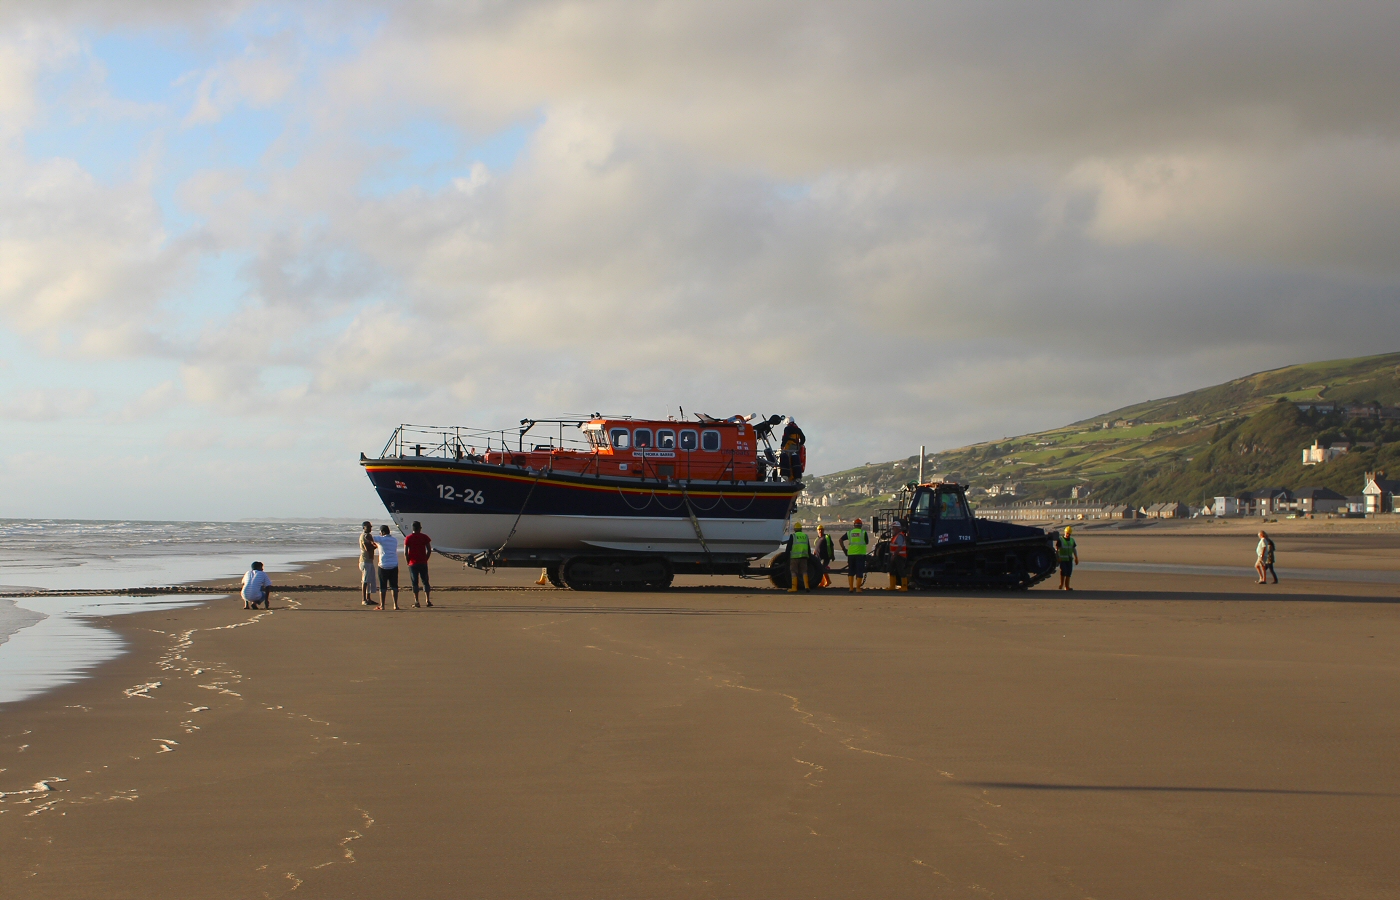 * Barmouth RNLI - Mersey class lifeboat RNLB Moira Barrie (by AJW) *